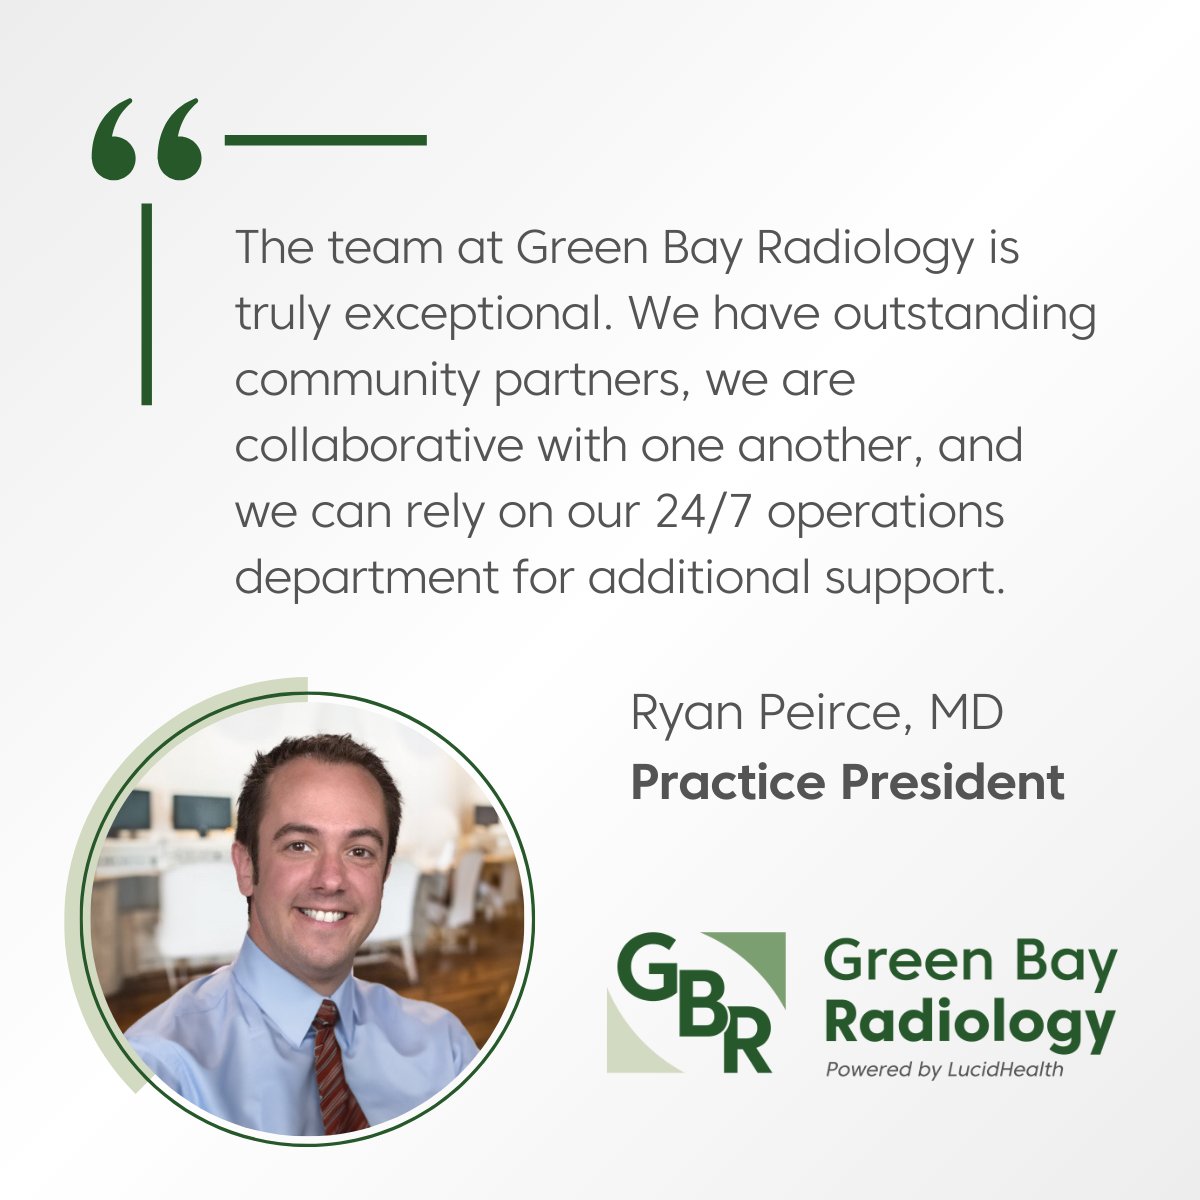 As one of the best places to live in the US, Green Bay offers affordable living, great mid-west culture & one of the best radiology groups in the area - #GreenBayRadiology!! Good news - we're hiring rads: loom.ly/RghRDMc #ClearlyTheFuture #PoweredByLucidHealth